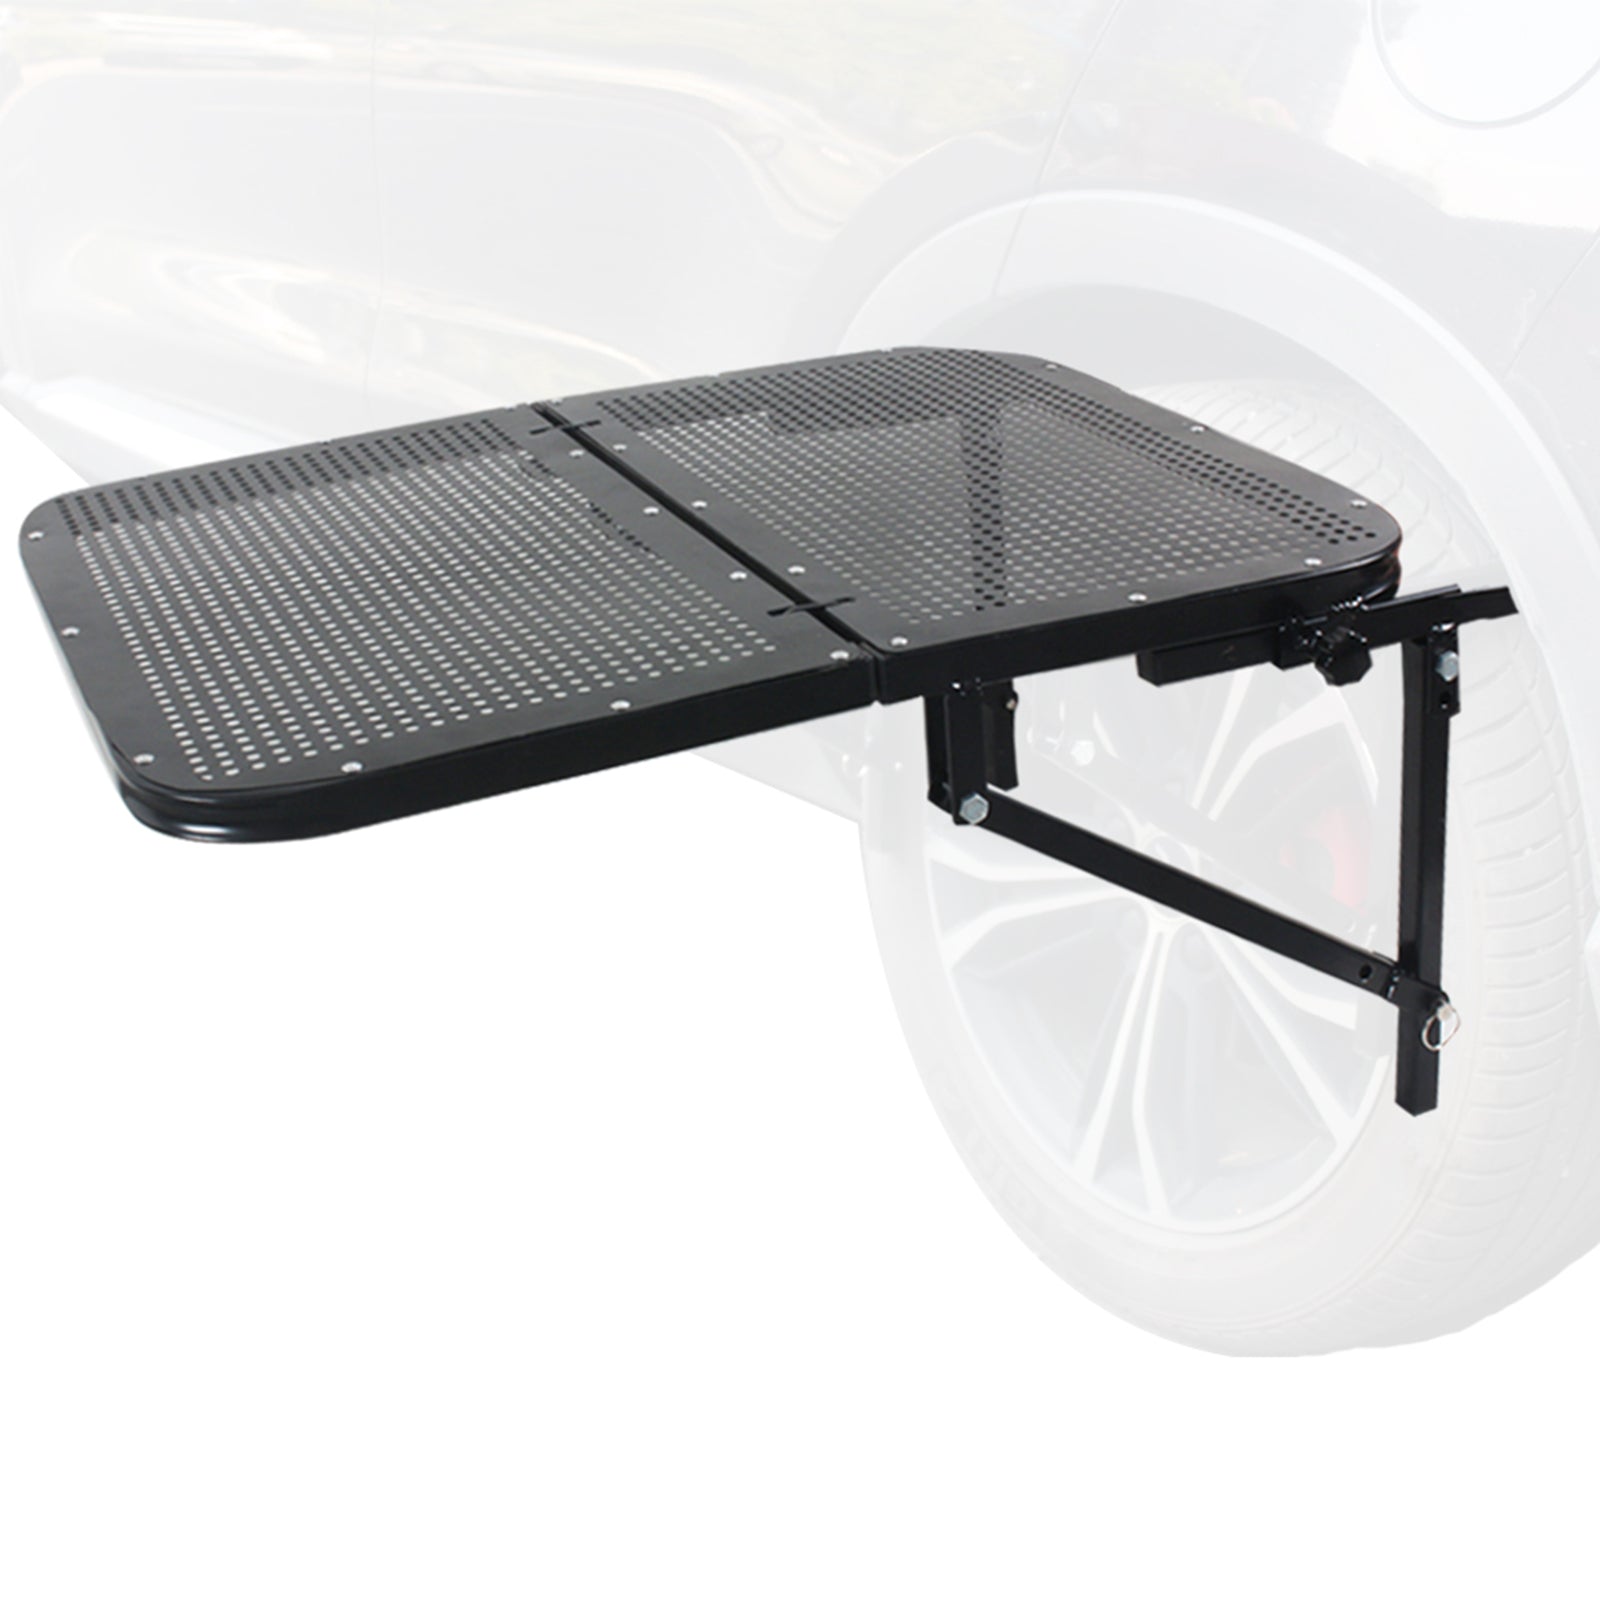 BESTOOL Tire Table Vehicle Tire-Mounted Steel Camping, Travel, Tailgating and Outdoor Work Table, Black (Steel) , 29 x 22 x 1.5"